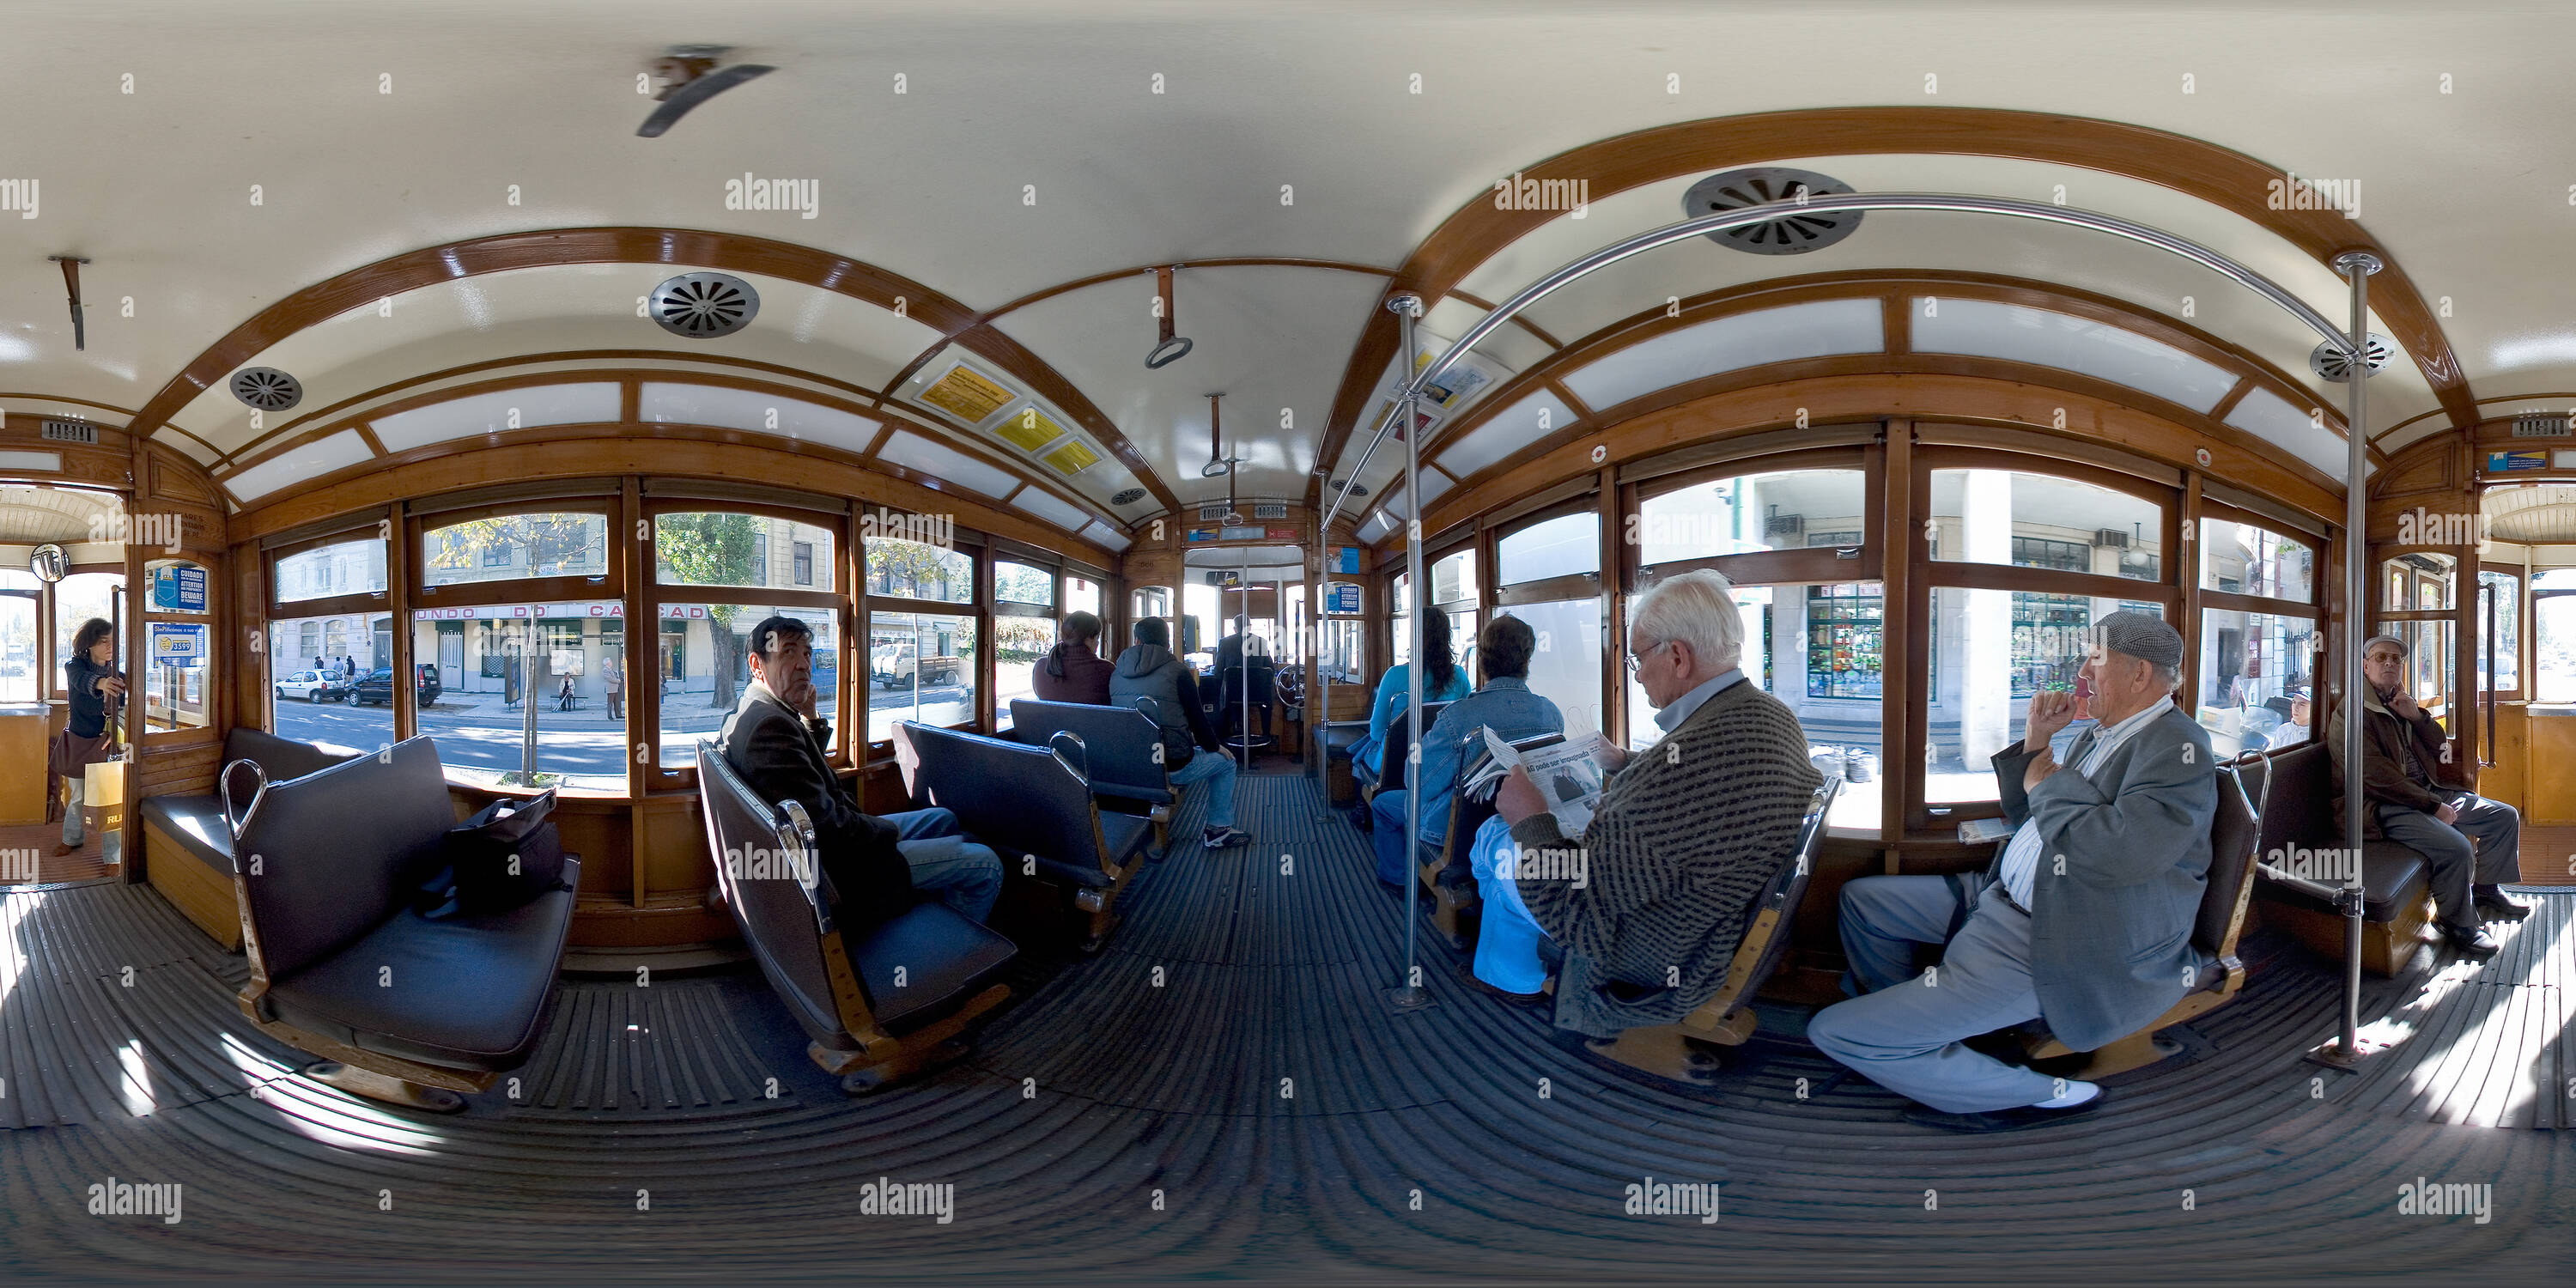 360 degree panoramic view of Inside of Tram